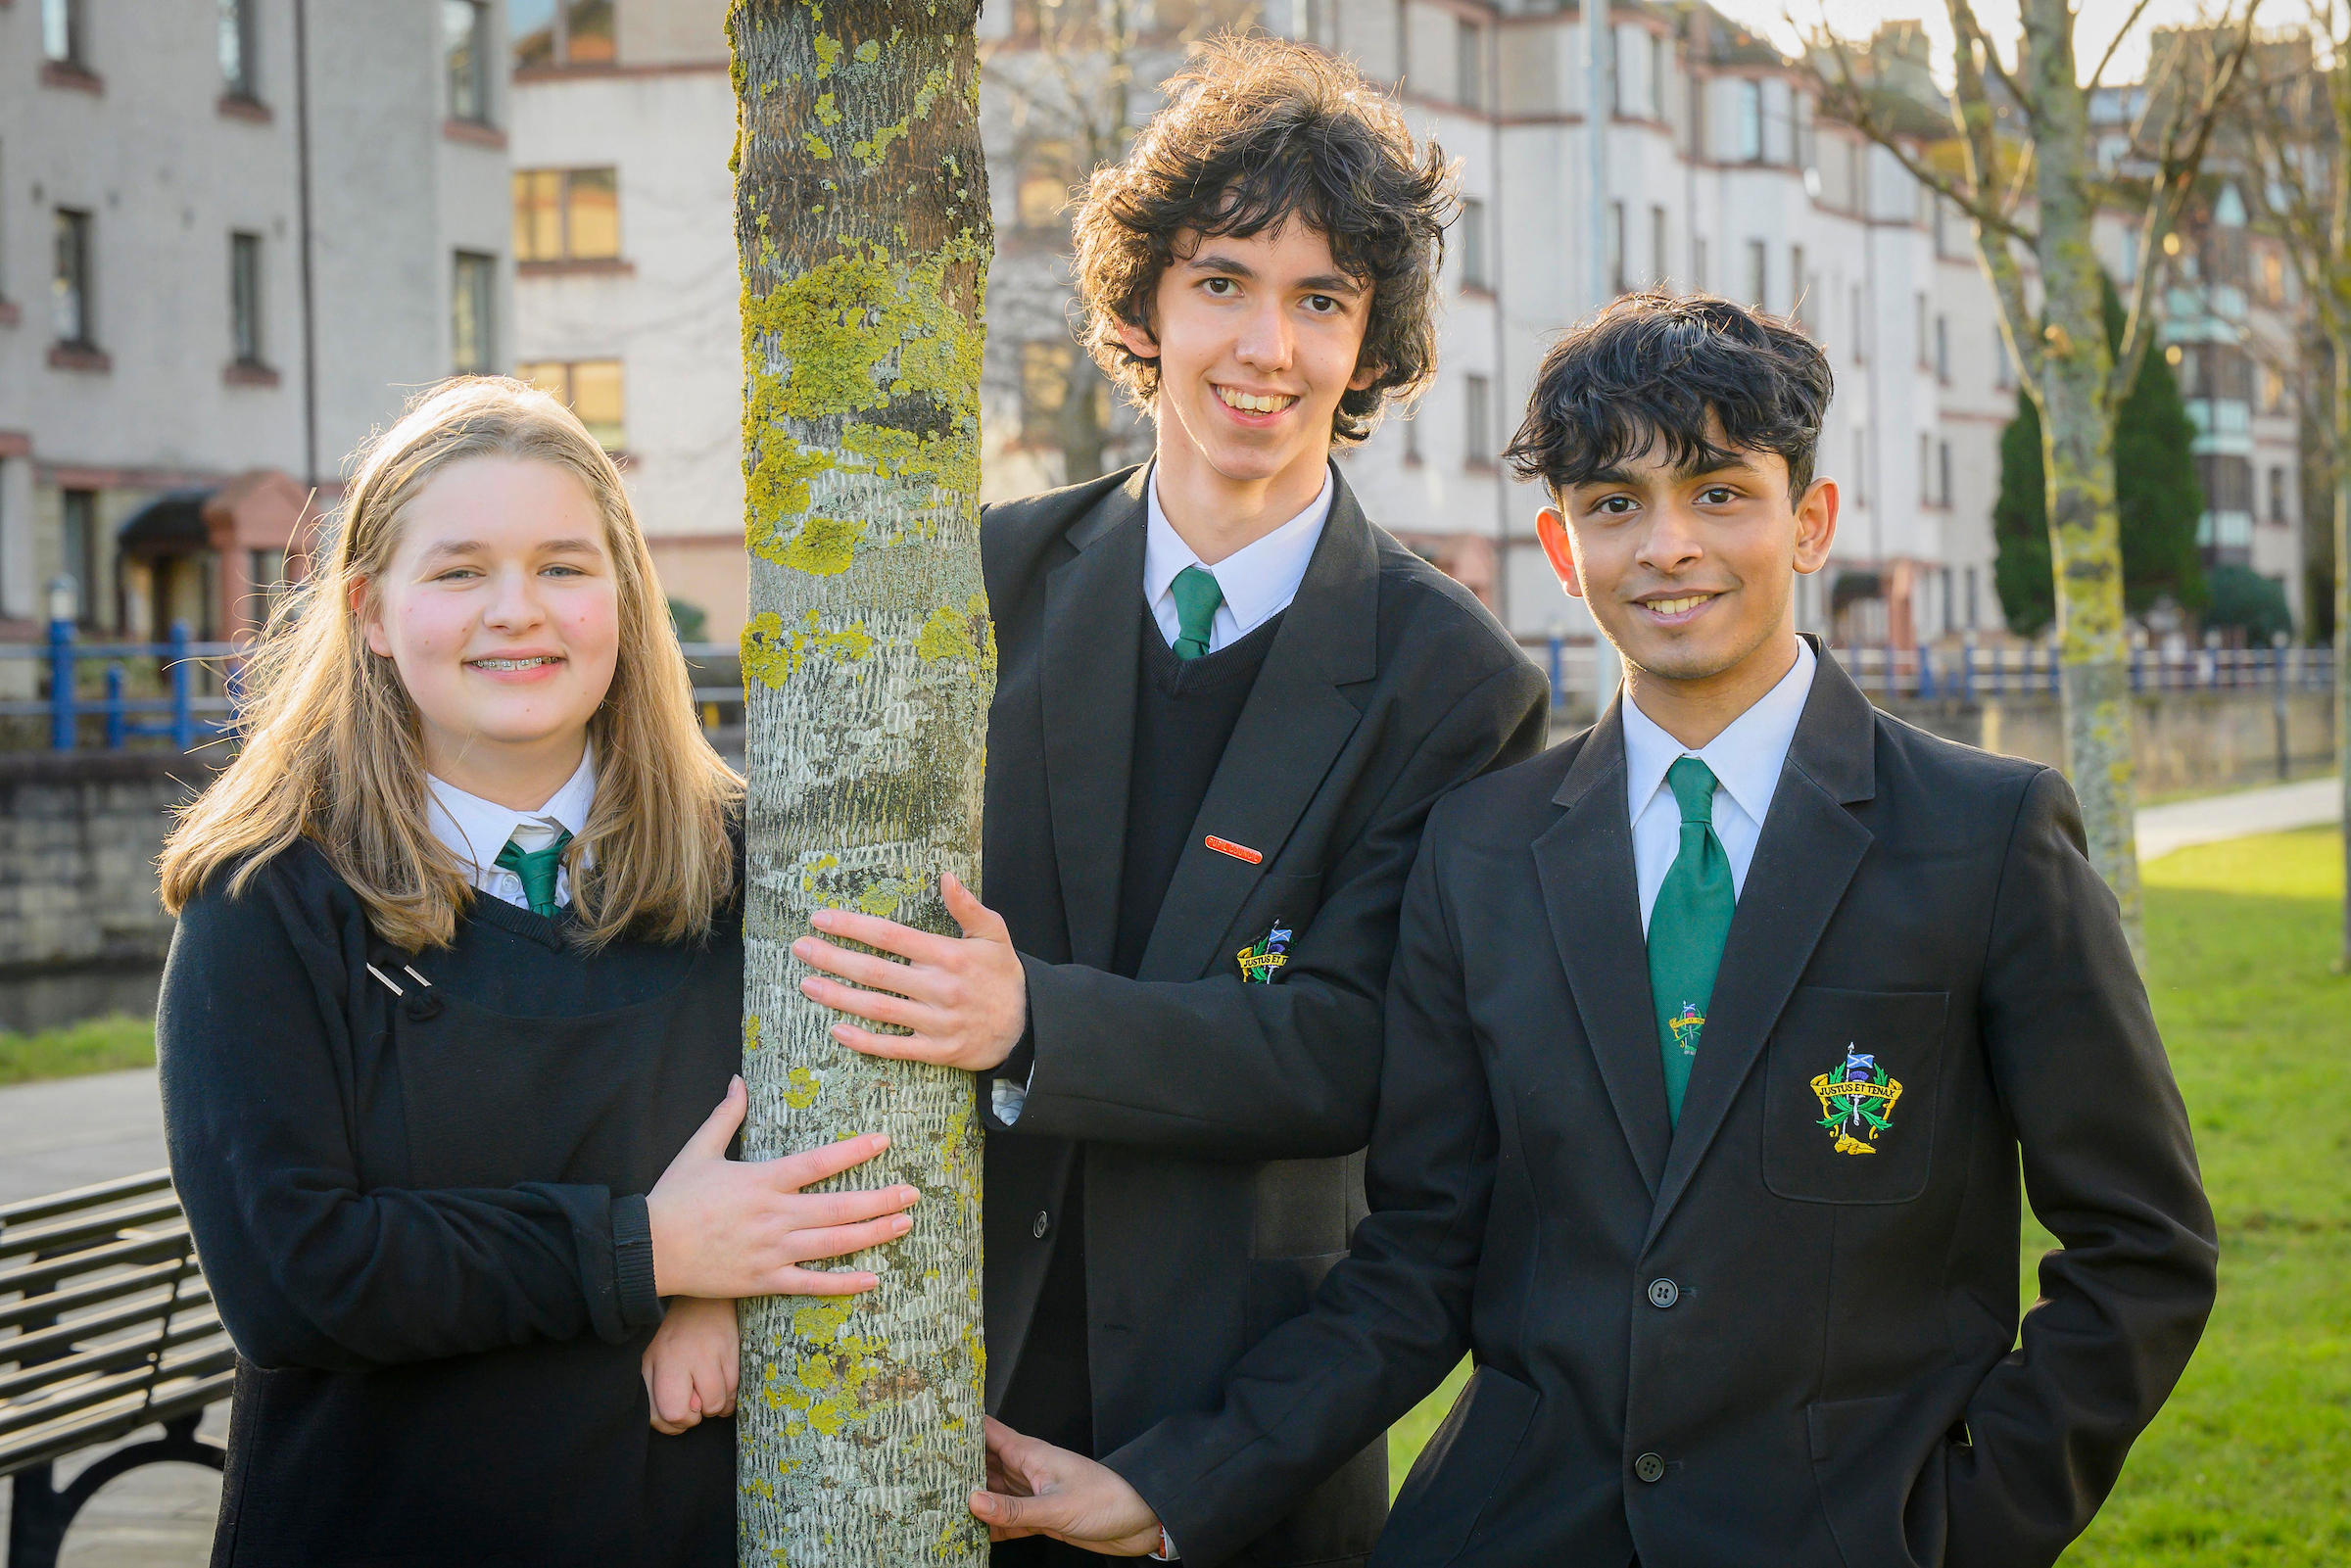 Edinburgh school wins first UK ‘Young People in European Forests’ Award.